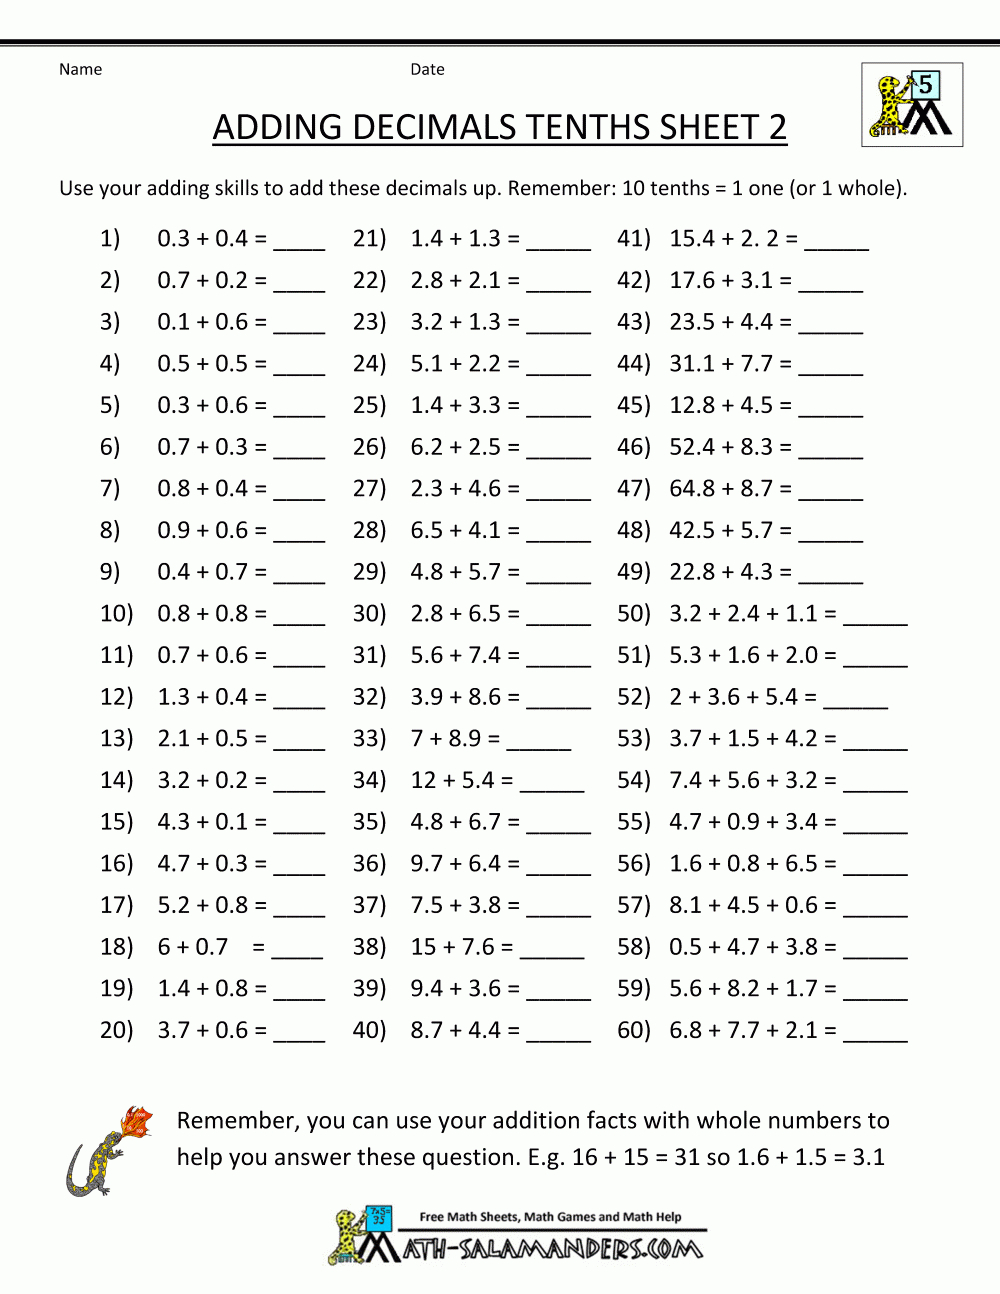 Operations With Decimals Review Worksheet Answer Key Db excel